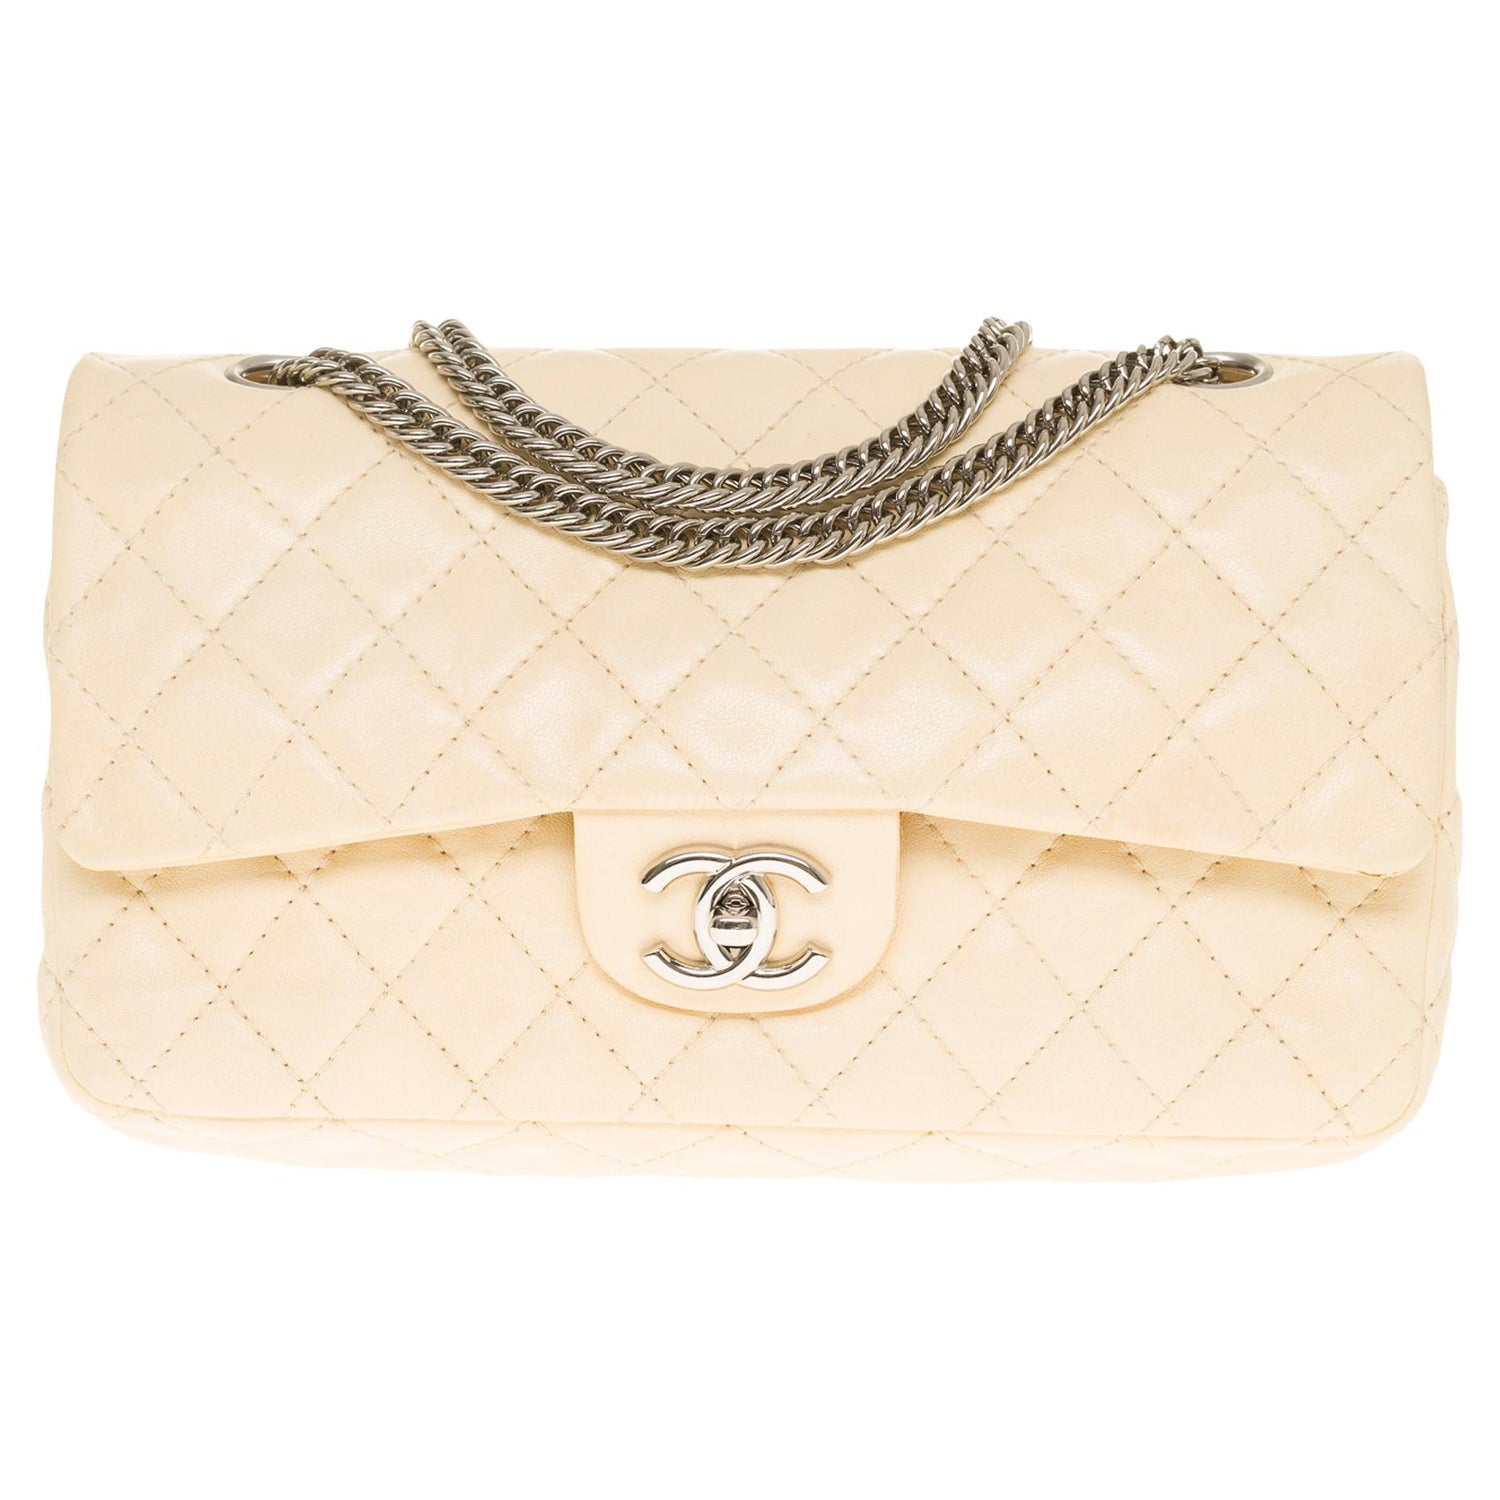 Gorgeous Chanel Classic Full Flap shoulder bag in white quilted